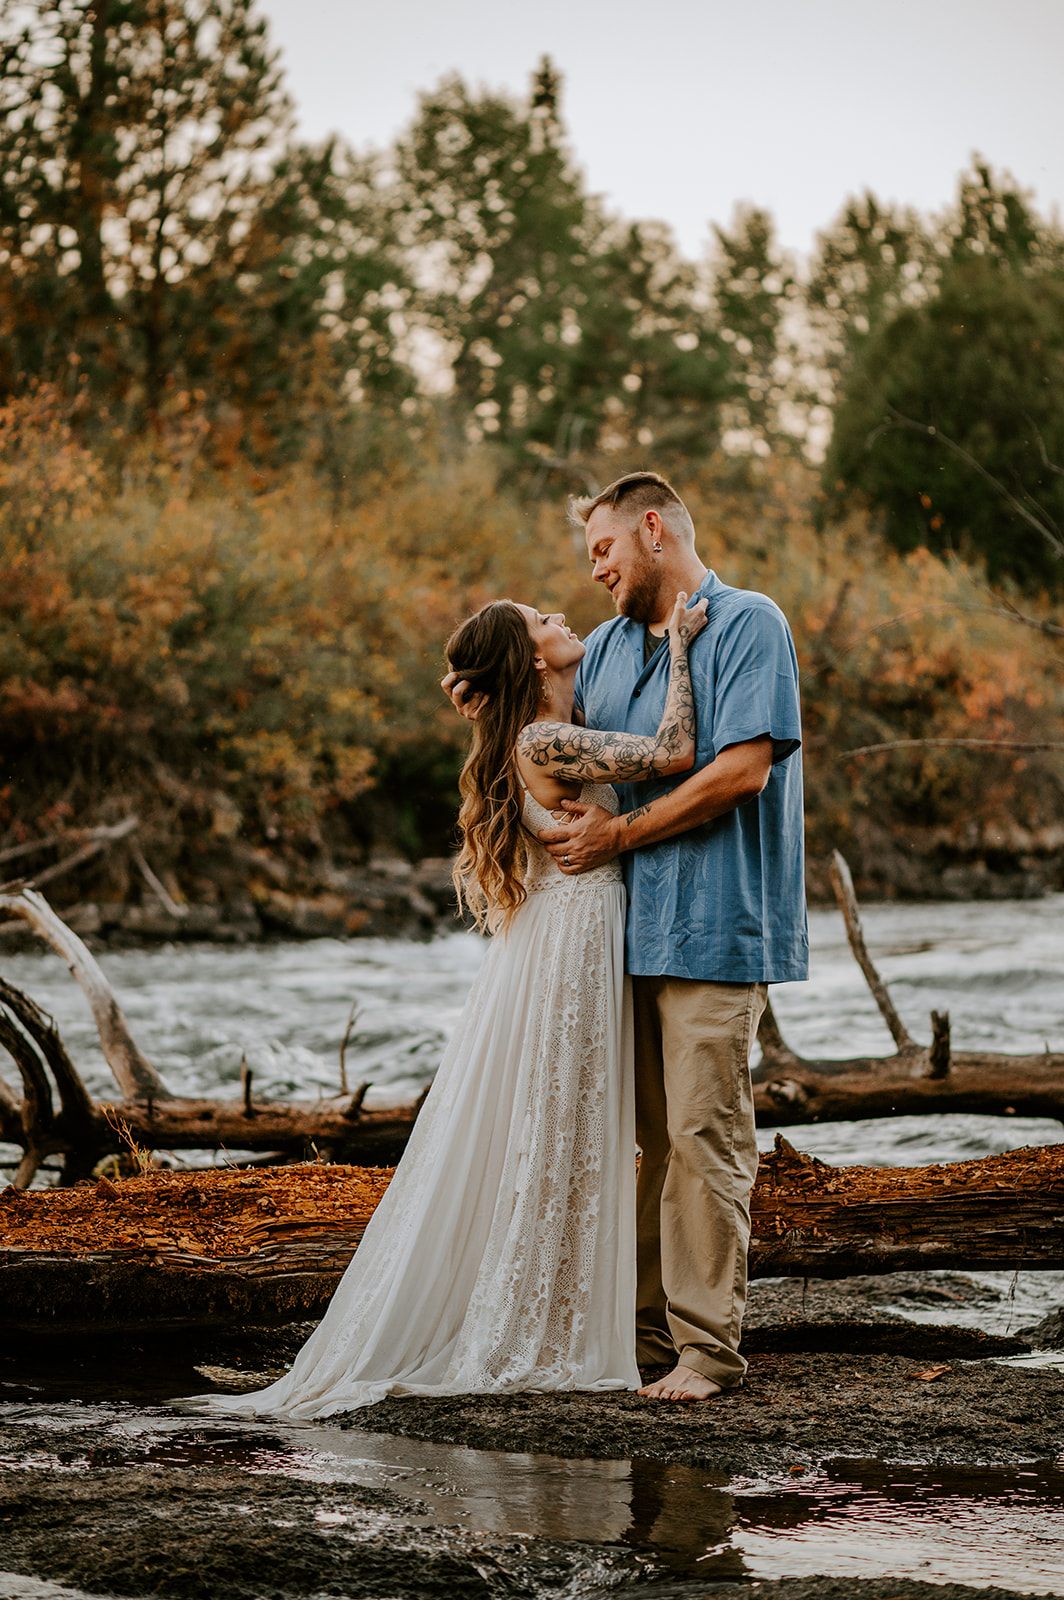 Husband and wife embrace at vow renewal at Dillon falls in bend